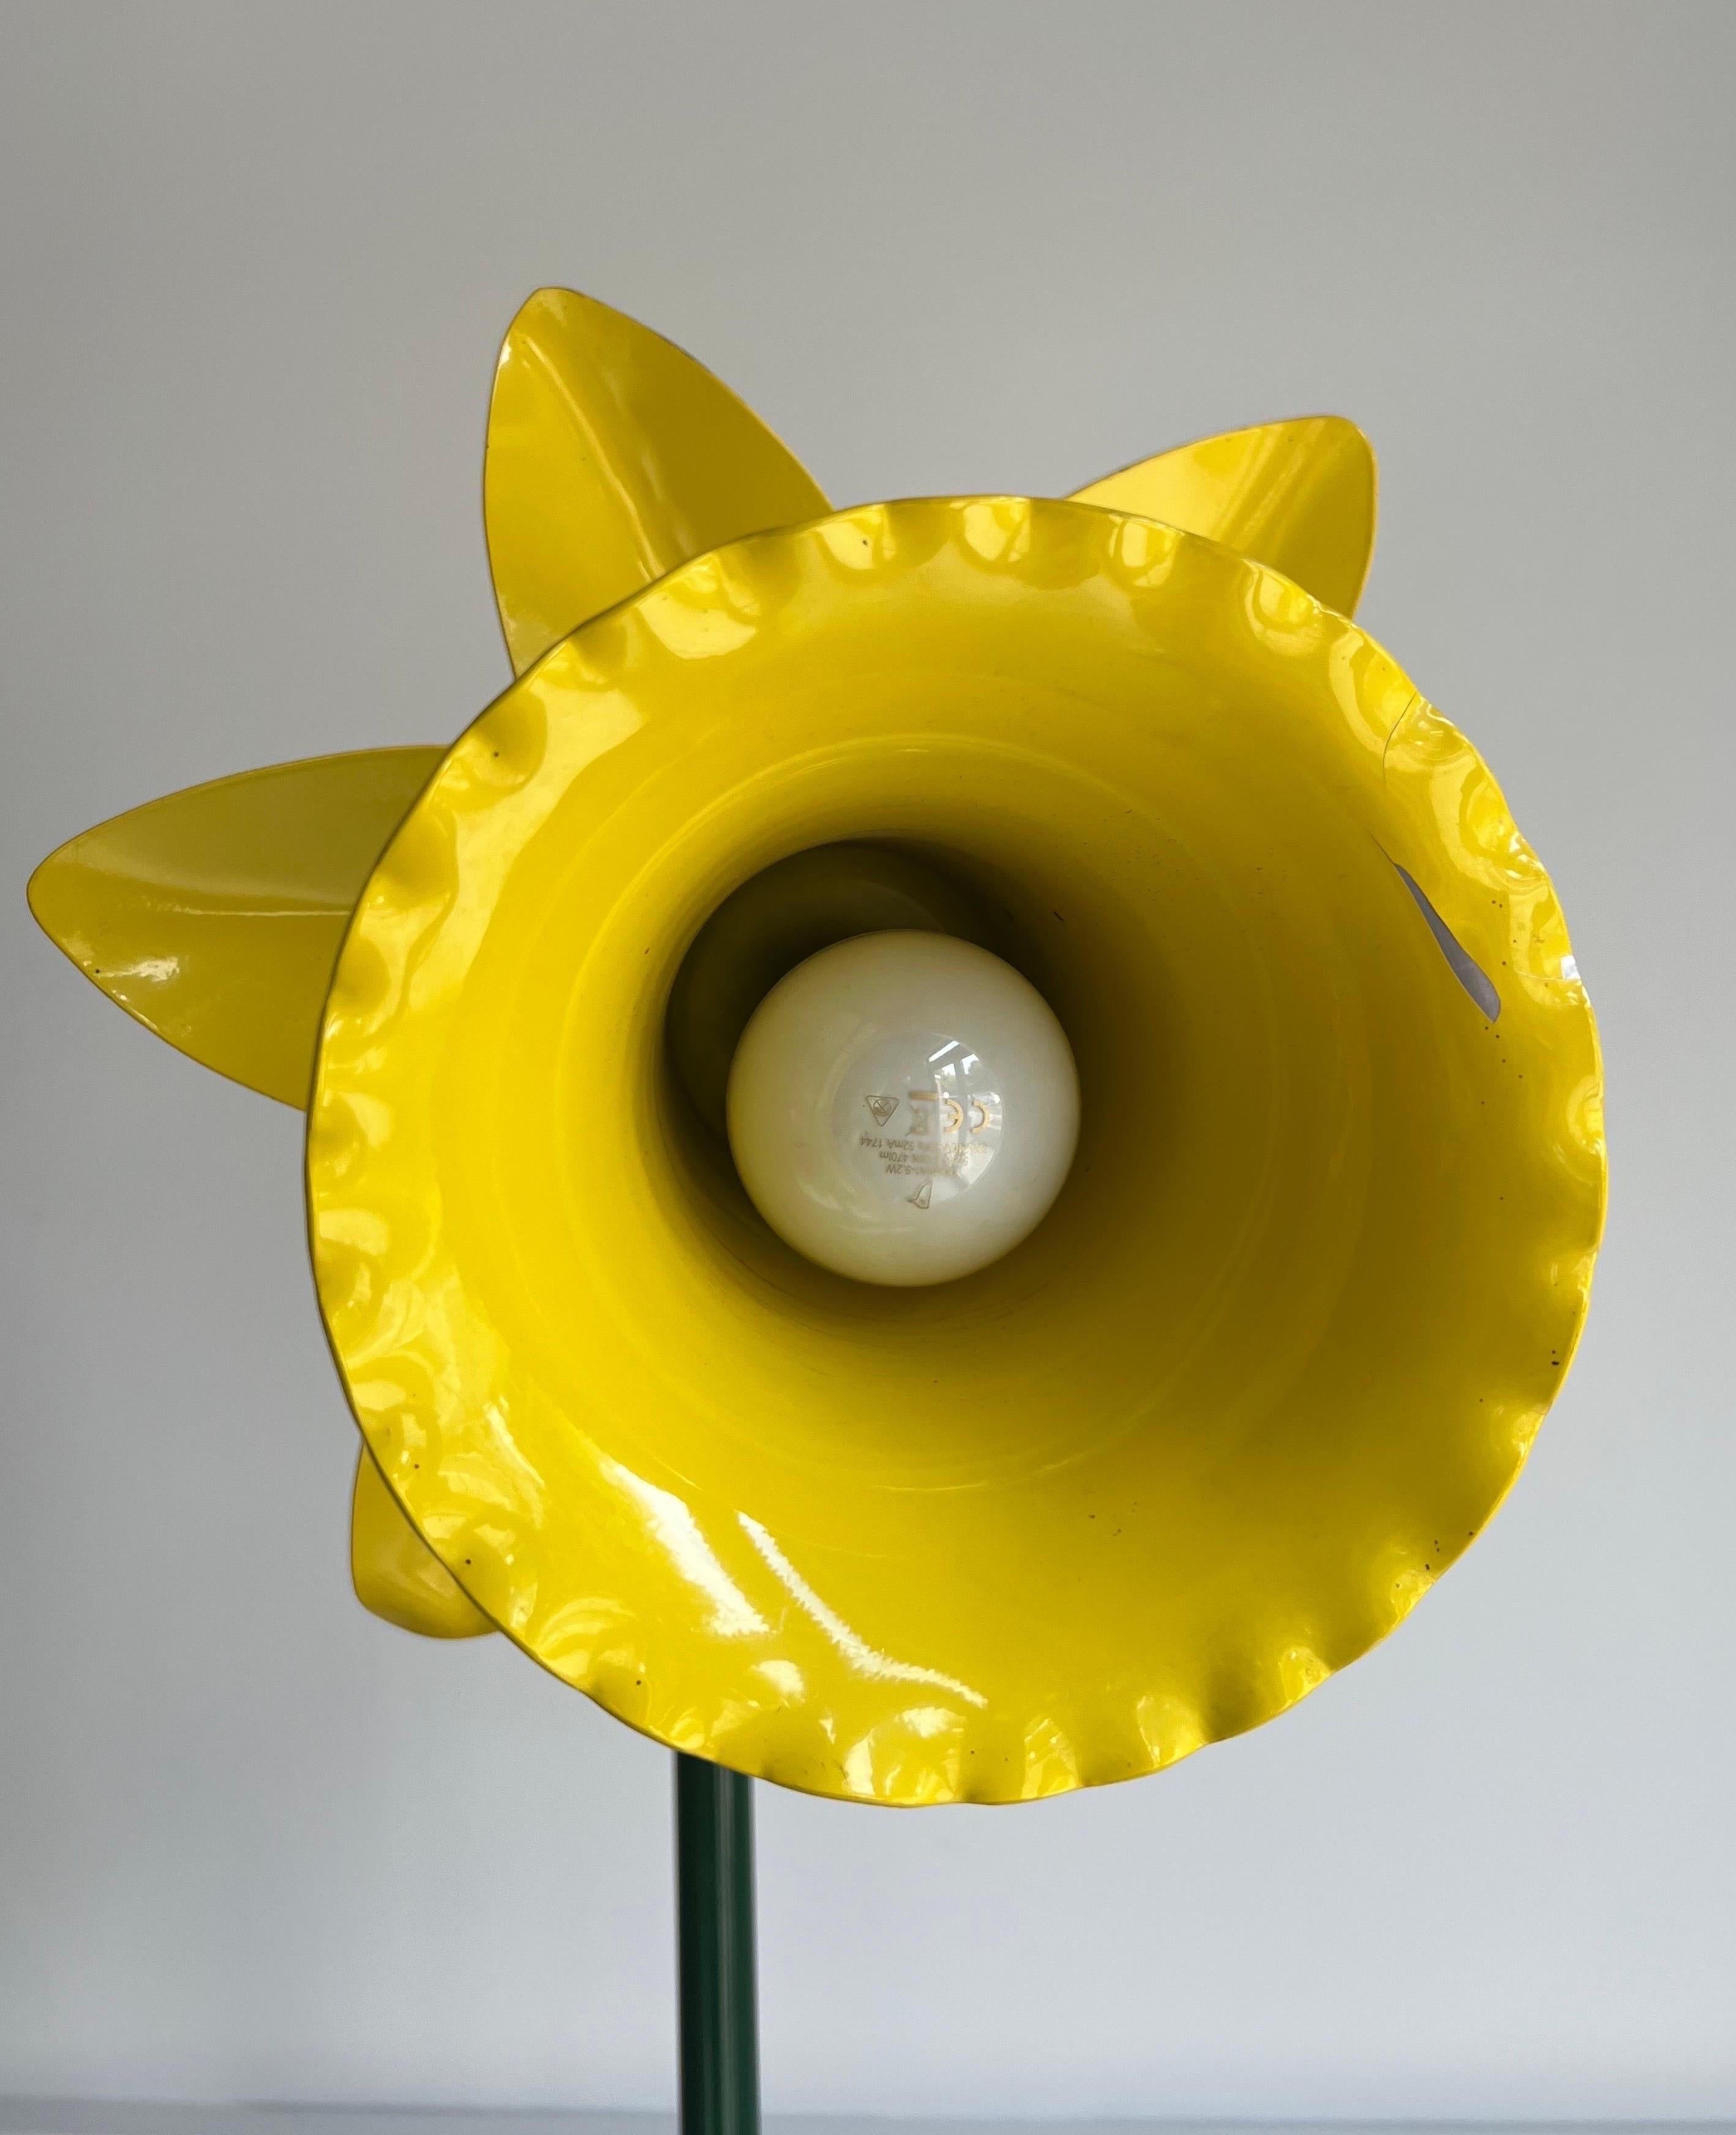 English Daffodil Floor Lamp By Peter Bliss